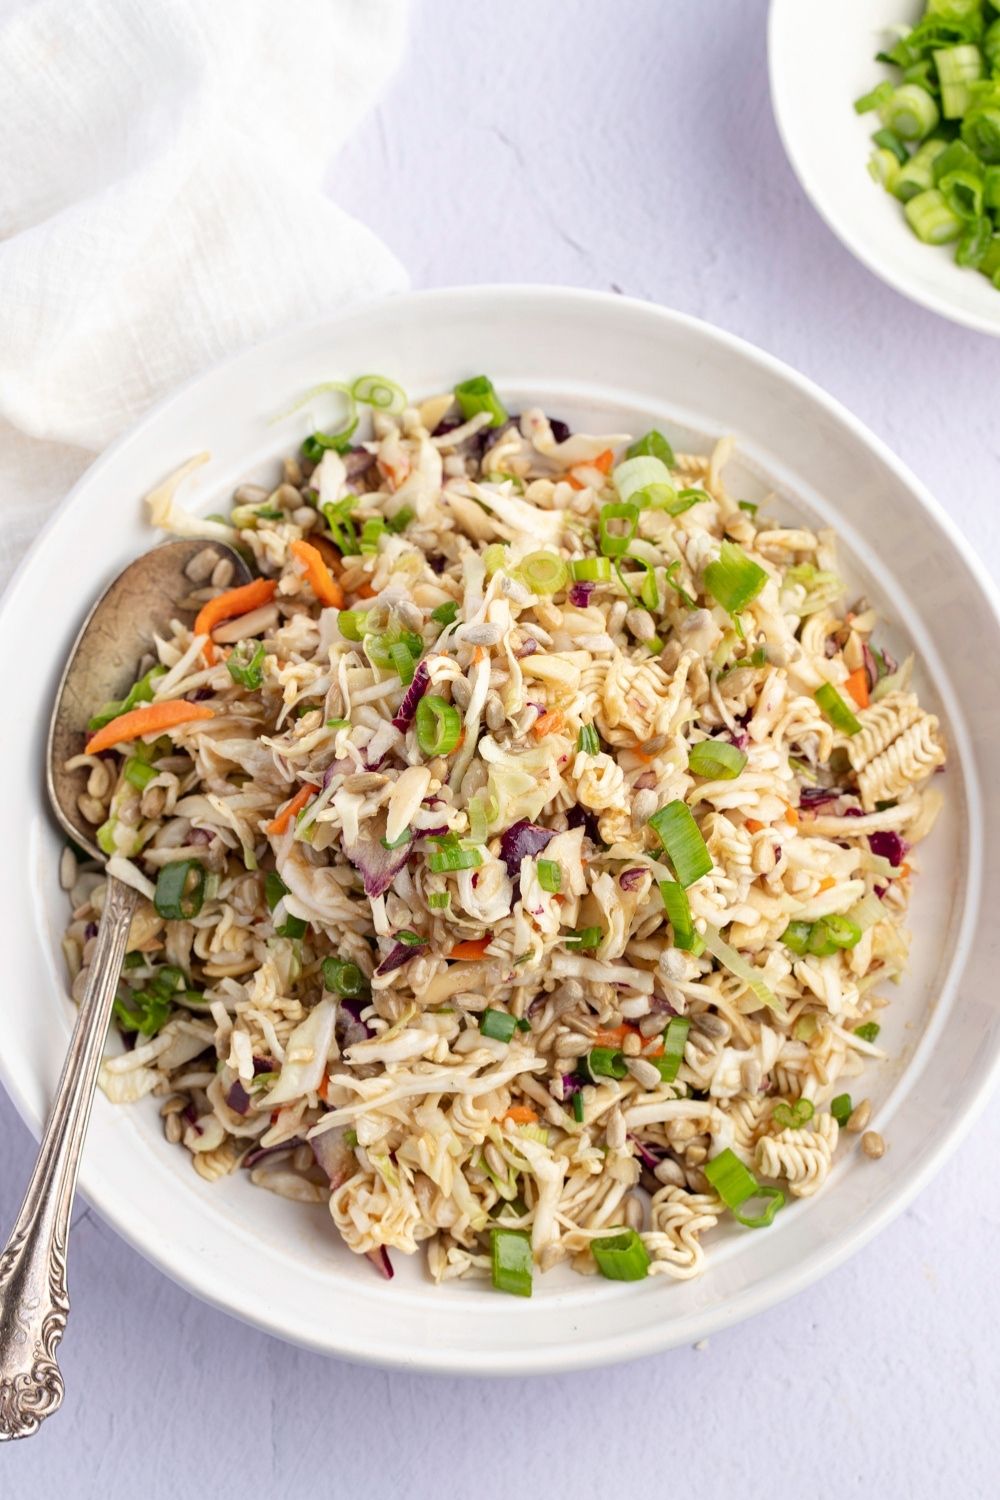 Best Oriental Coleslaw (Easy Asian Recipe) featuring Colorful and Crunchy Oriental Coleslaw with Carrots, Cabbage, Green Onions, and Ramen Noodles